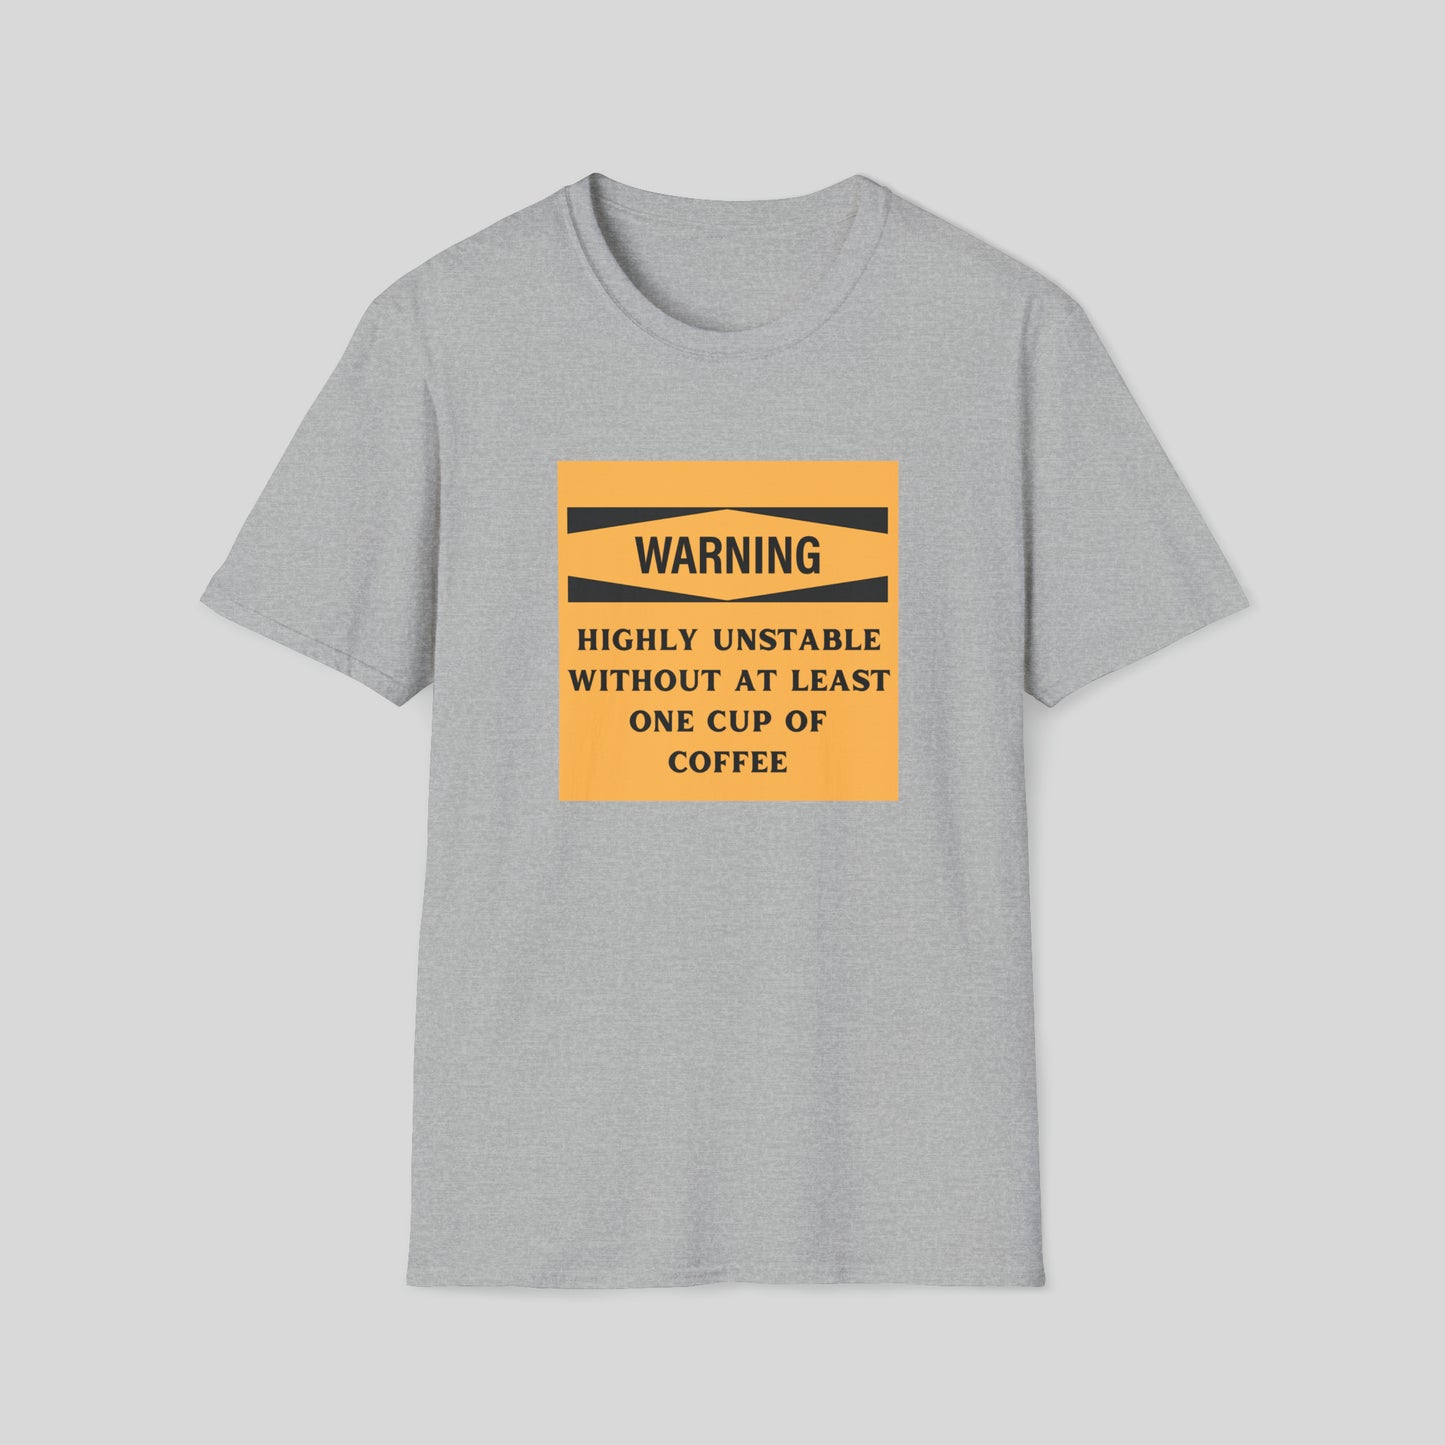 WARNING: HIGHLY UNSTABLE WITHOUT COFFEE T-SHIRT